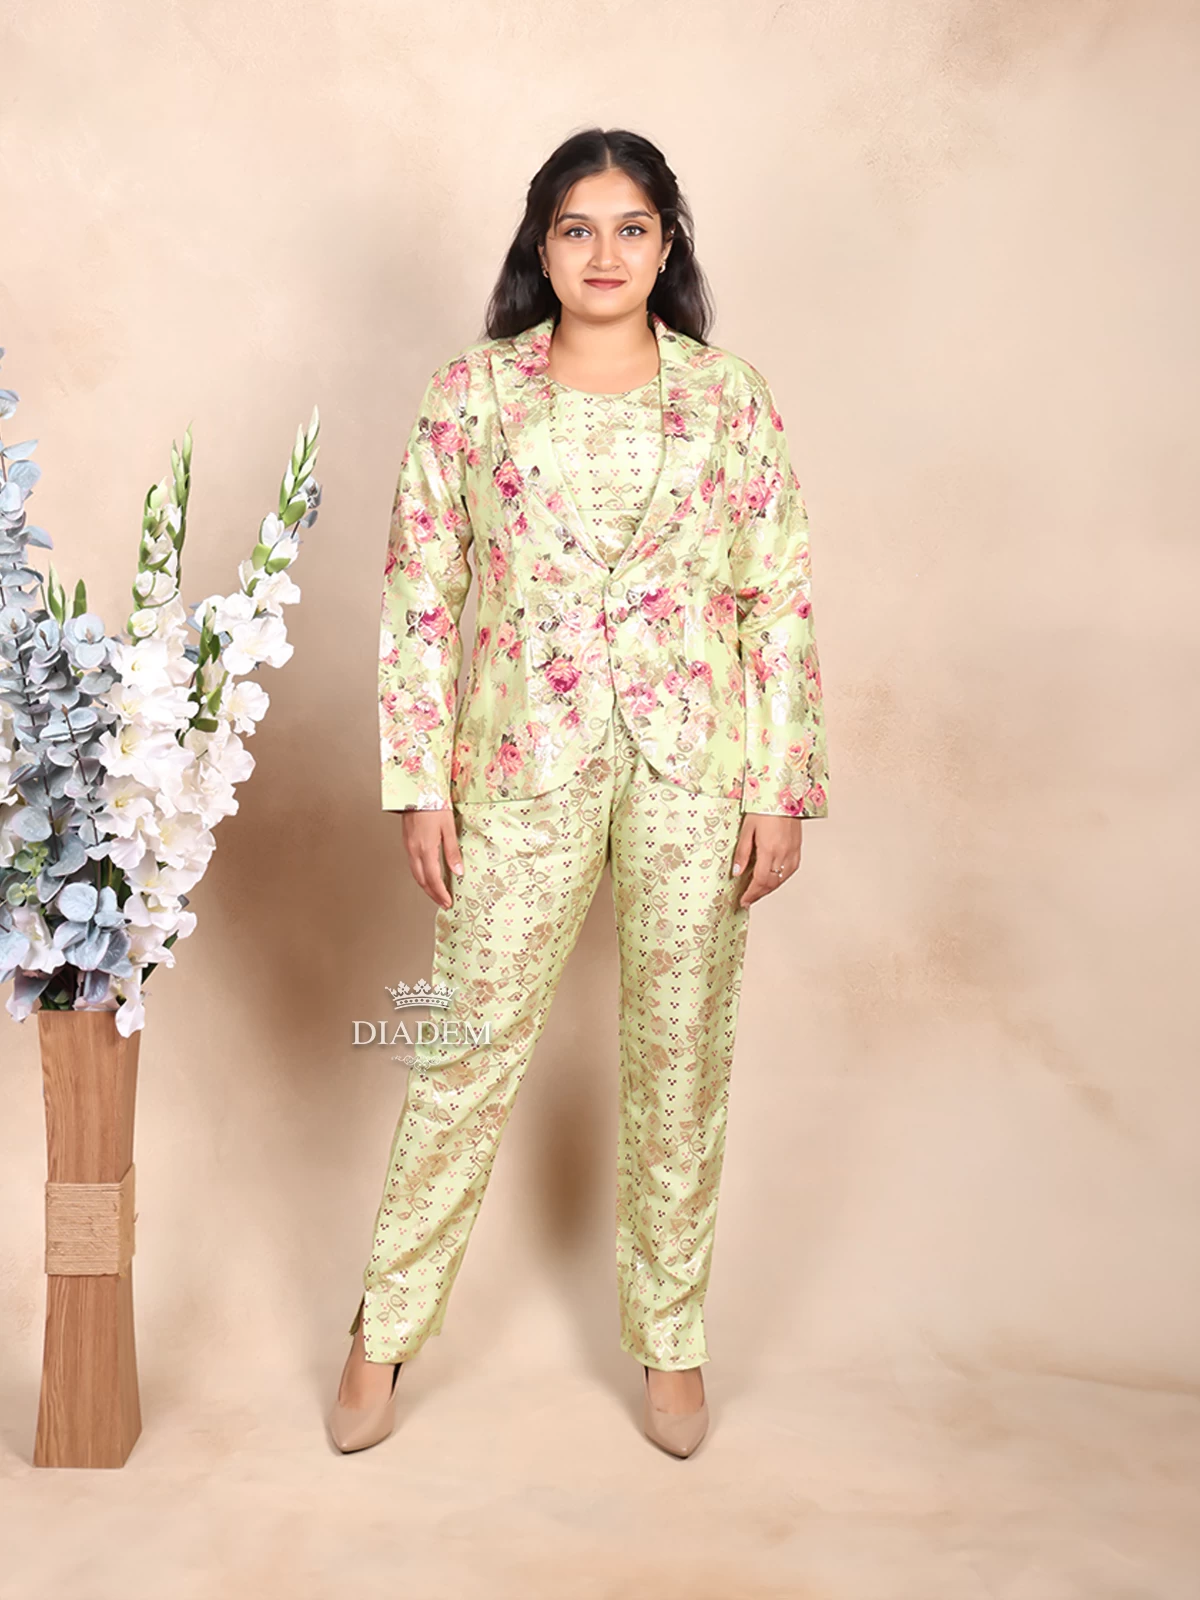 Pista Green Pant Suit Adorned with Floral Prints paired with Matching Overcoat